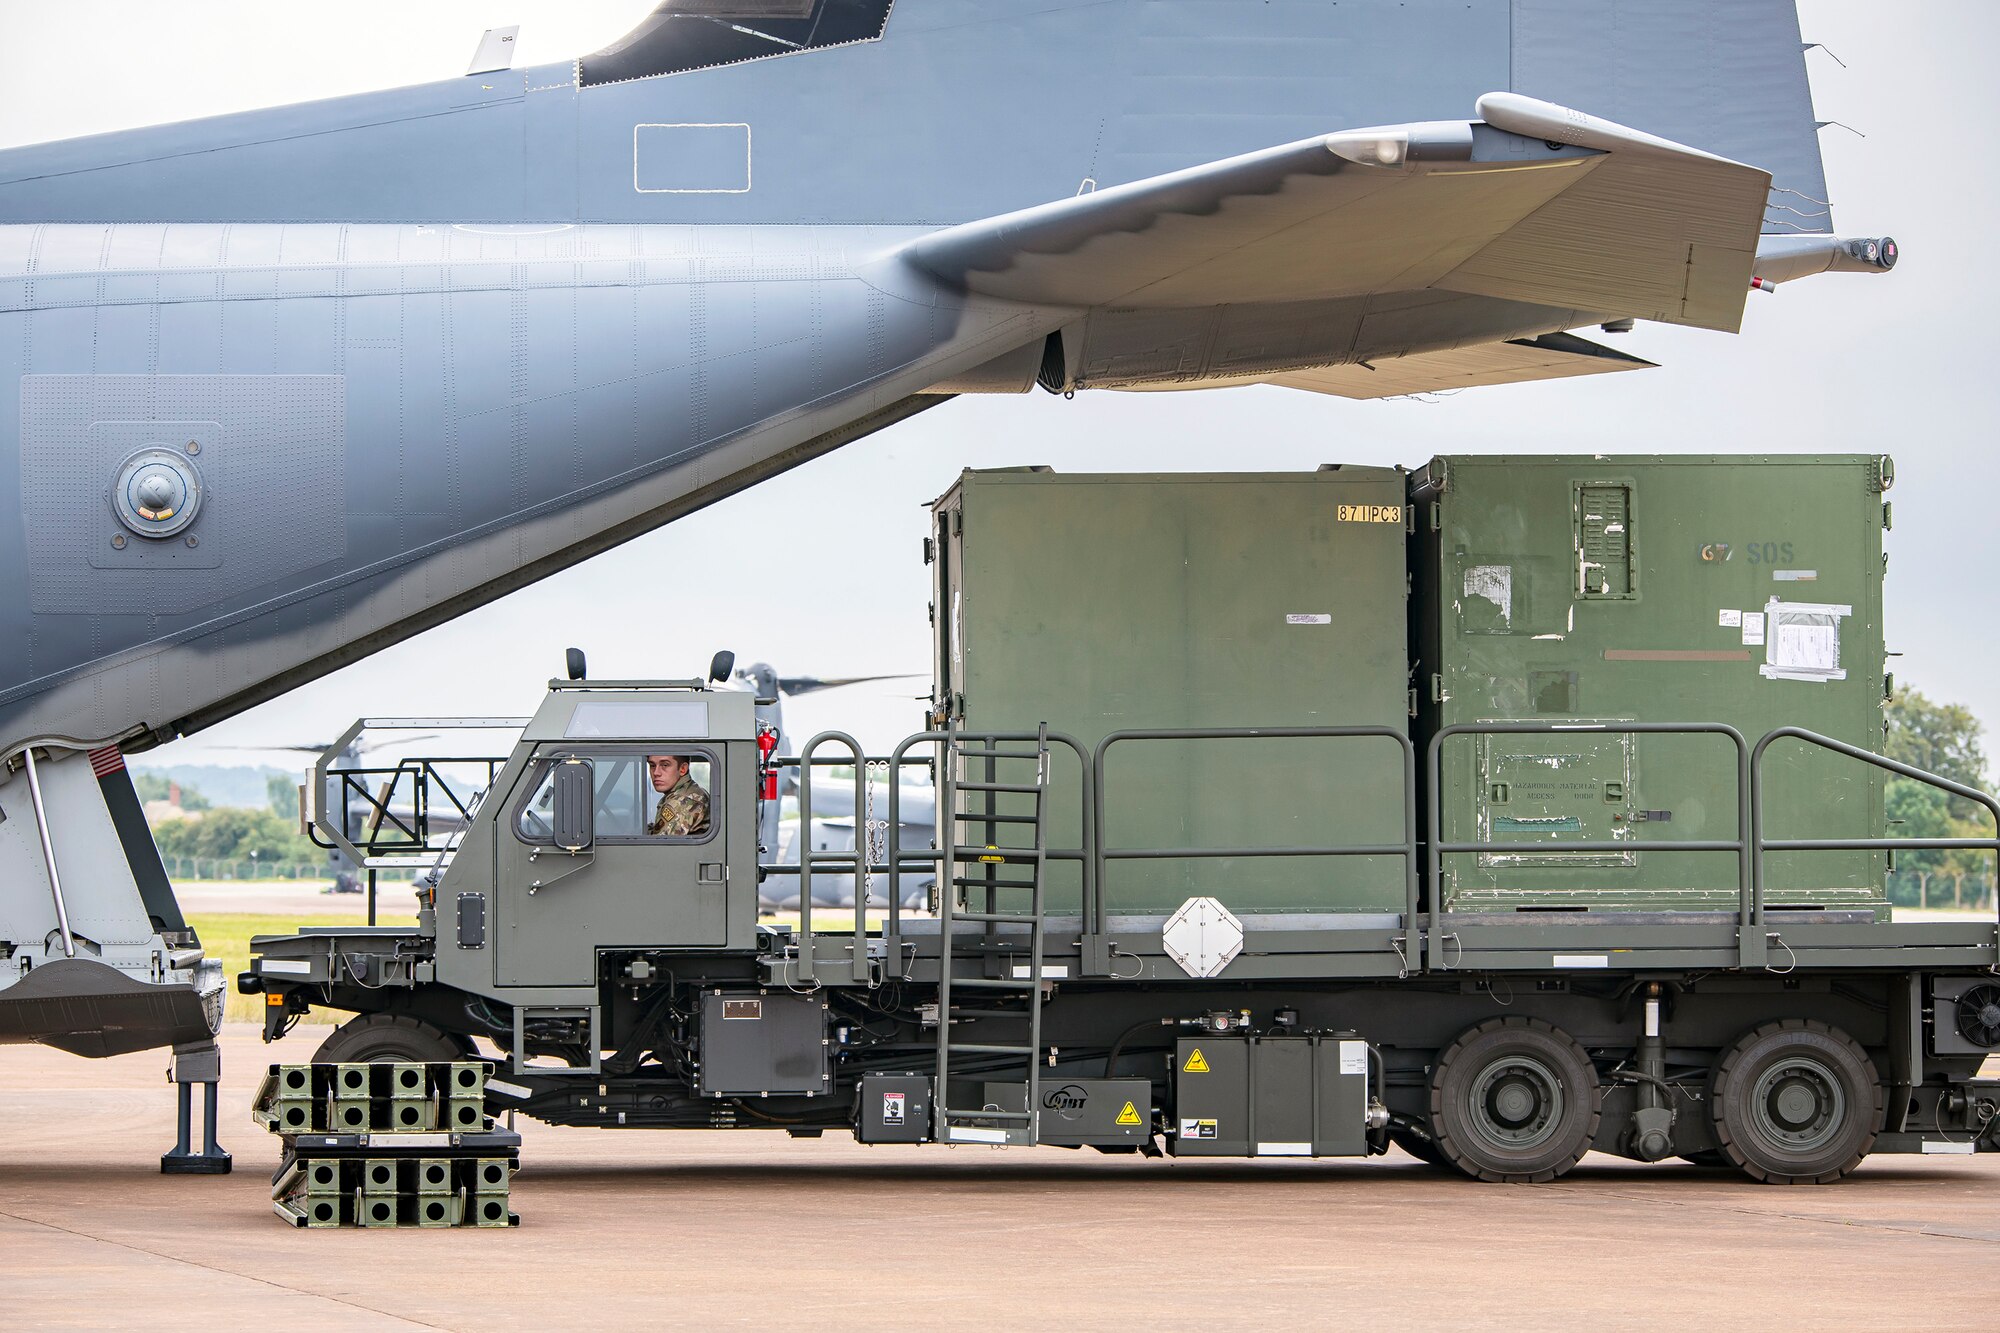 An Airman from the 420th Air Base Group removes cargo from an MC-130J Commando II during an Agile Combat Employment exercise at RAF Fairford, England, Sept. 13, 2021. The exercise enables U.S. forces in Europe to operate from locations with varying levels of capacity and support. This further ensures Airmen and aircrews are postured to deliver lethal combat power across the full spectrum of military operations. (U.S. Air Force photo by Senior Airman Eugene Oliver)